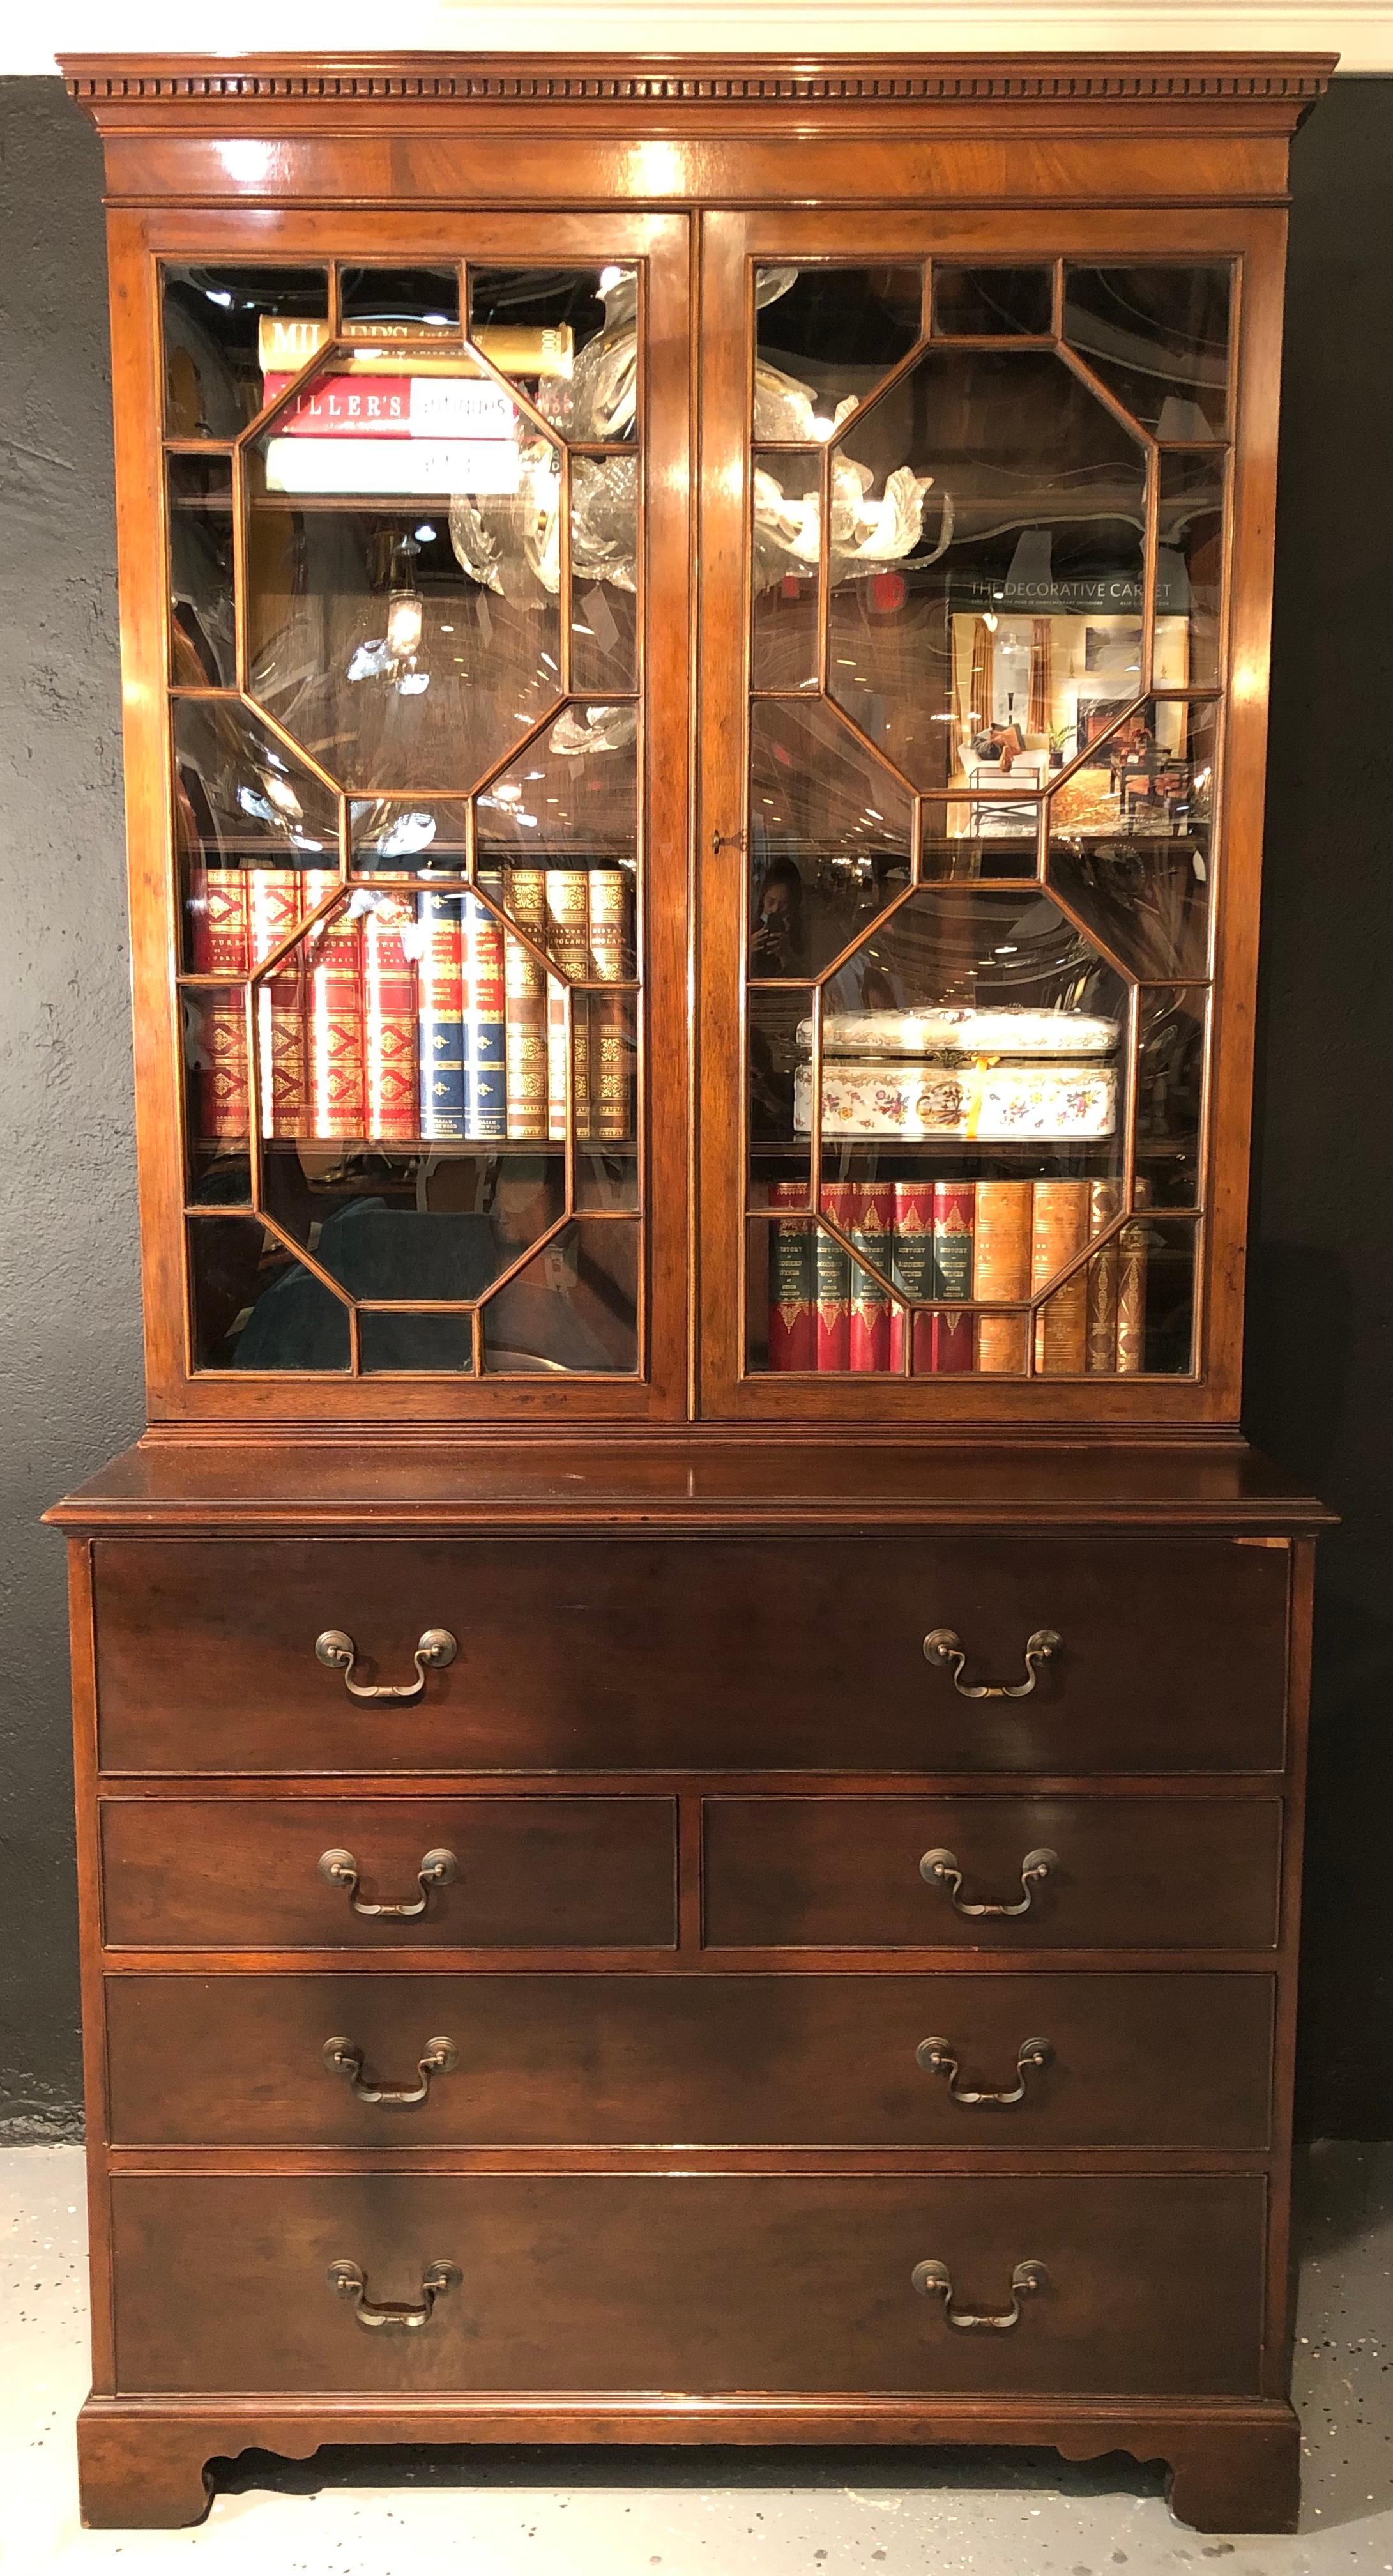 19th century George lll Style Butler's Secretary. This fine deep mahogany colored desk is simply stunning having Dentil molding above Mullion glazed doors sitting atop a desk and chest of drawers.
In a desirable rich deep colored mahogany finish,